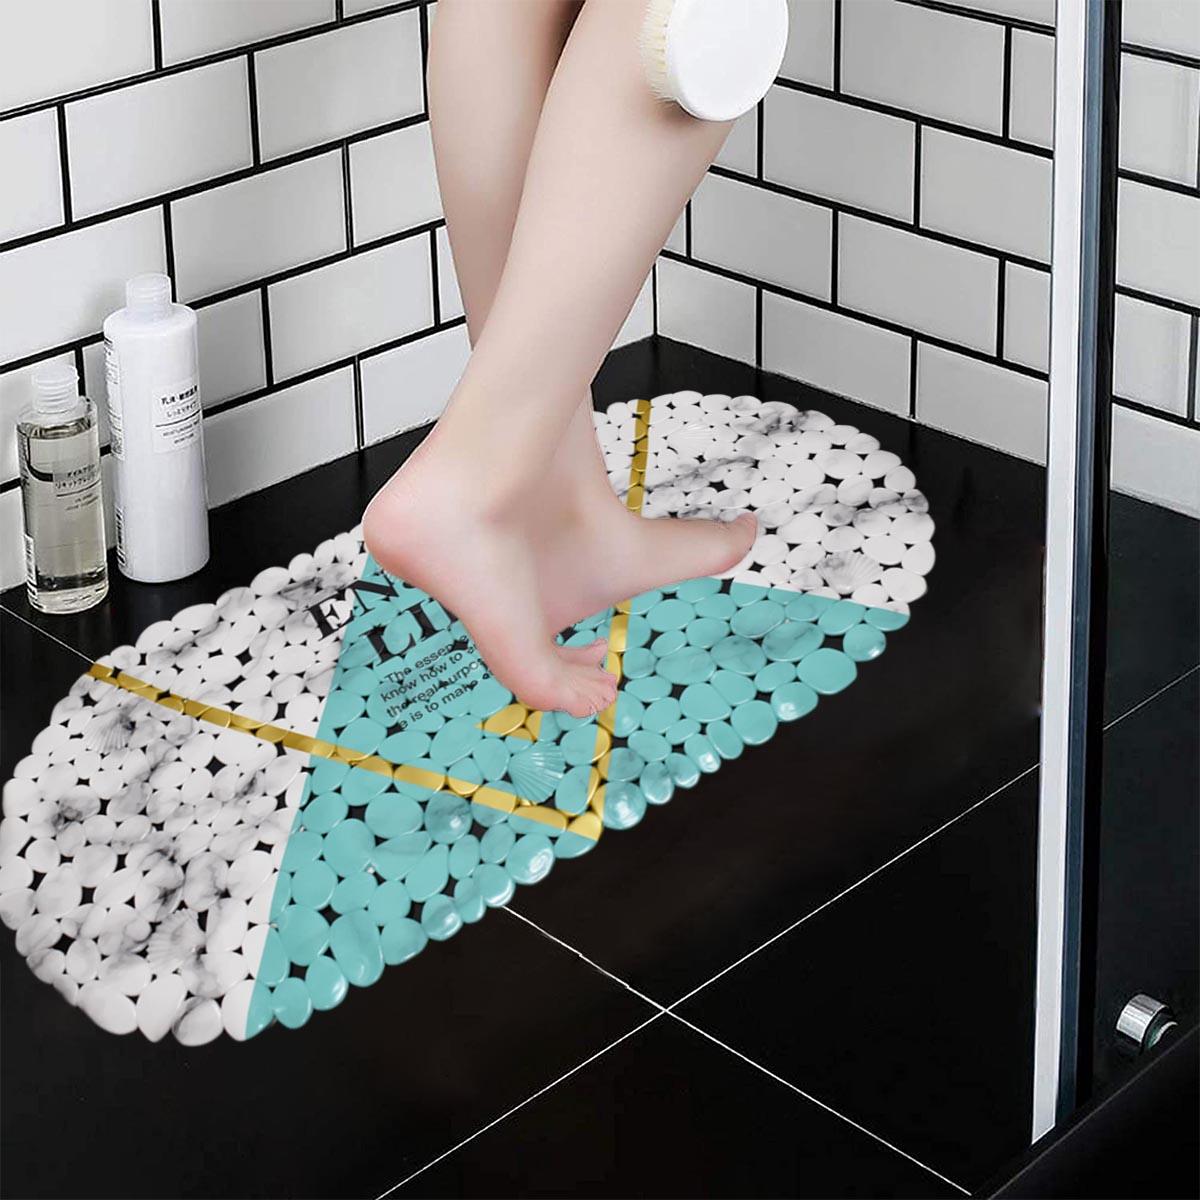 Kookee PVC Bath Mat Non-Slip Pebble Bathtub Mat L=69cm x W=35cm (for Smooth/Non-Textured Tubs Only) Safe Shower Mat with Drain Holes, Suction Cups for Bathroom (41-4935)